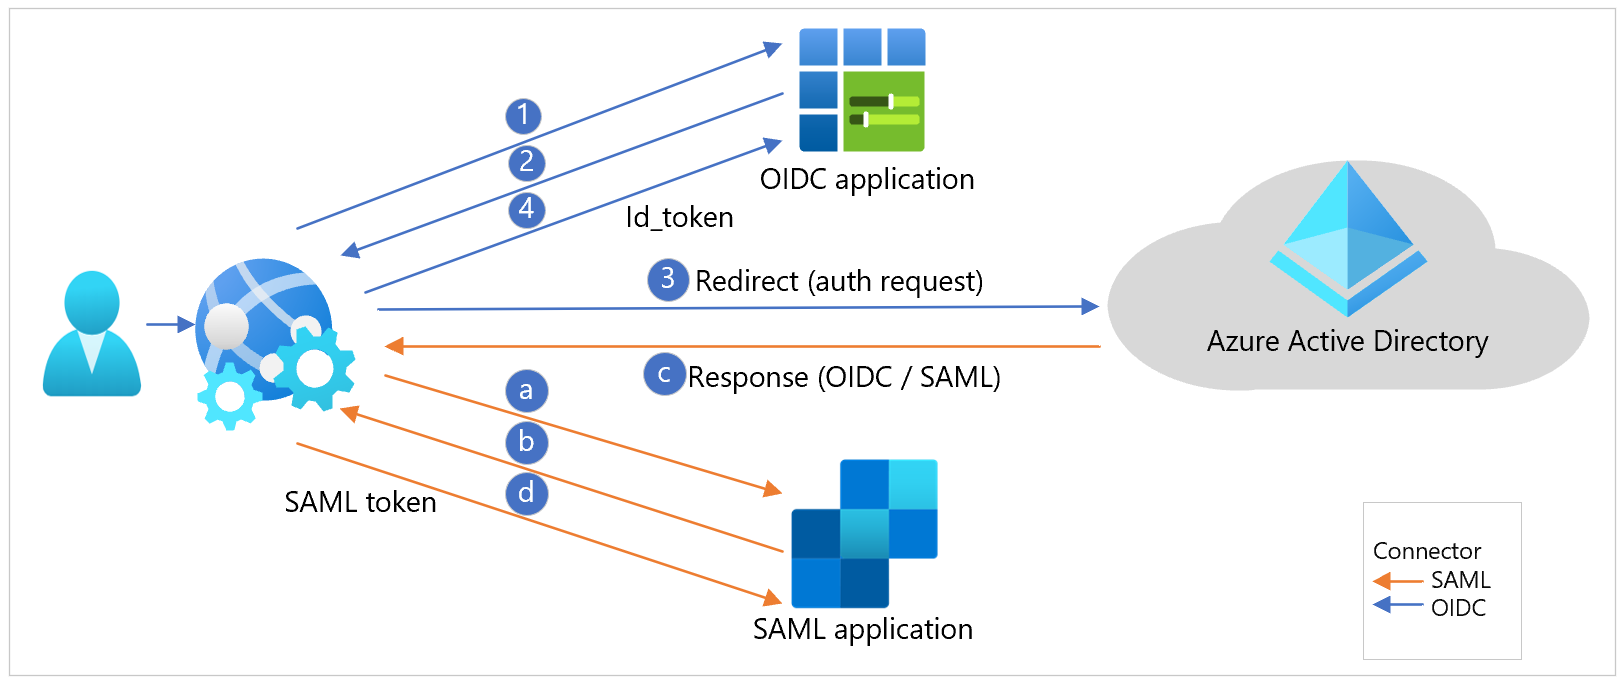 Diagram of the OIDC and SAML application workflows.